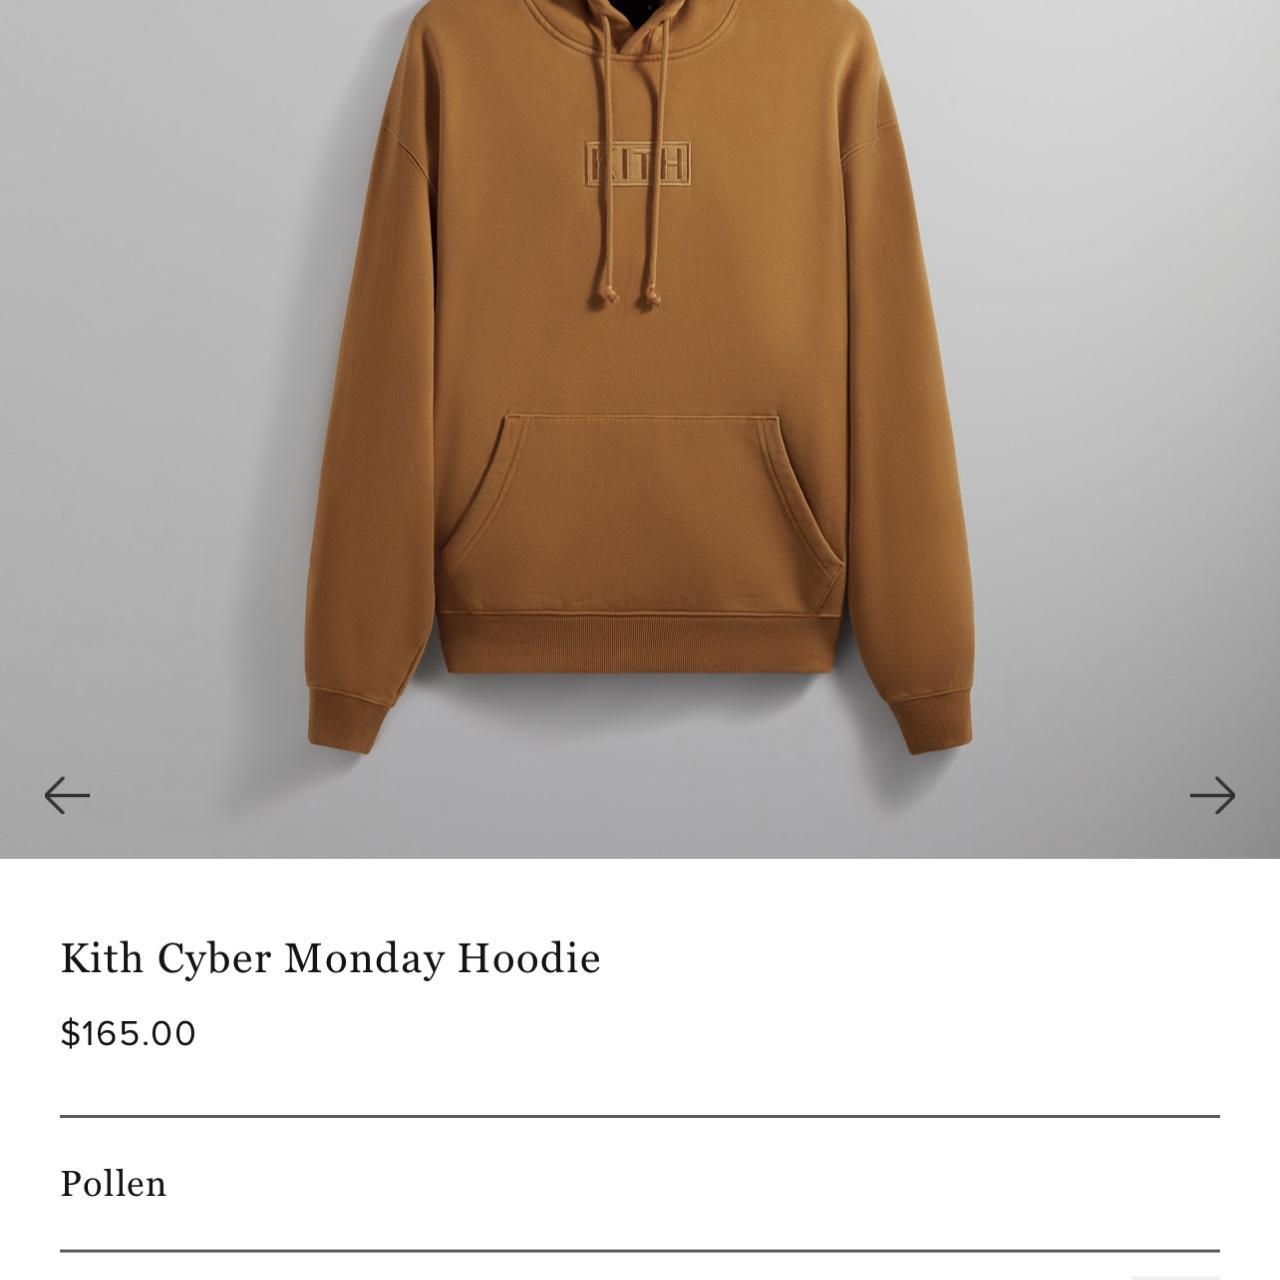 Kith Cyber Monday Hoodie #Kith DETAILS Cotton... - Depop